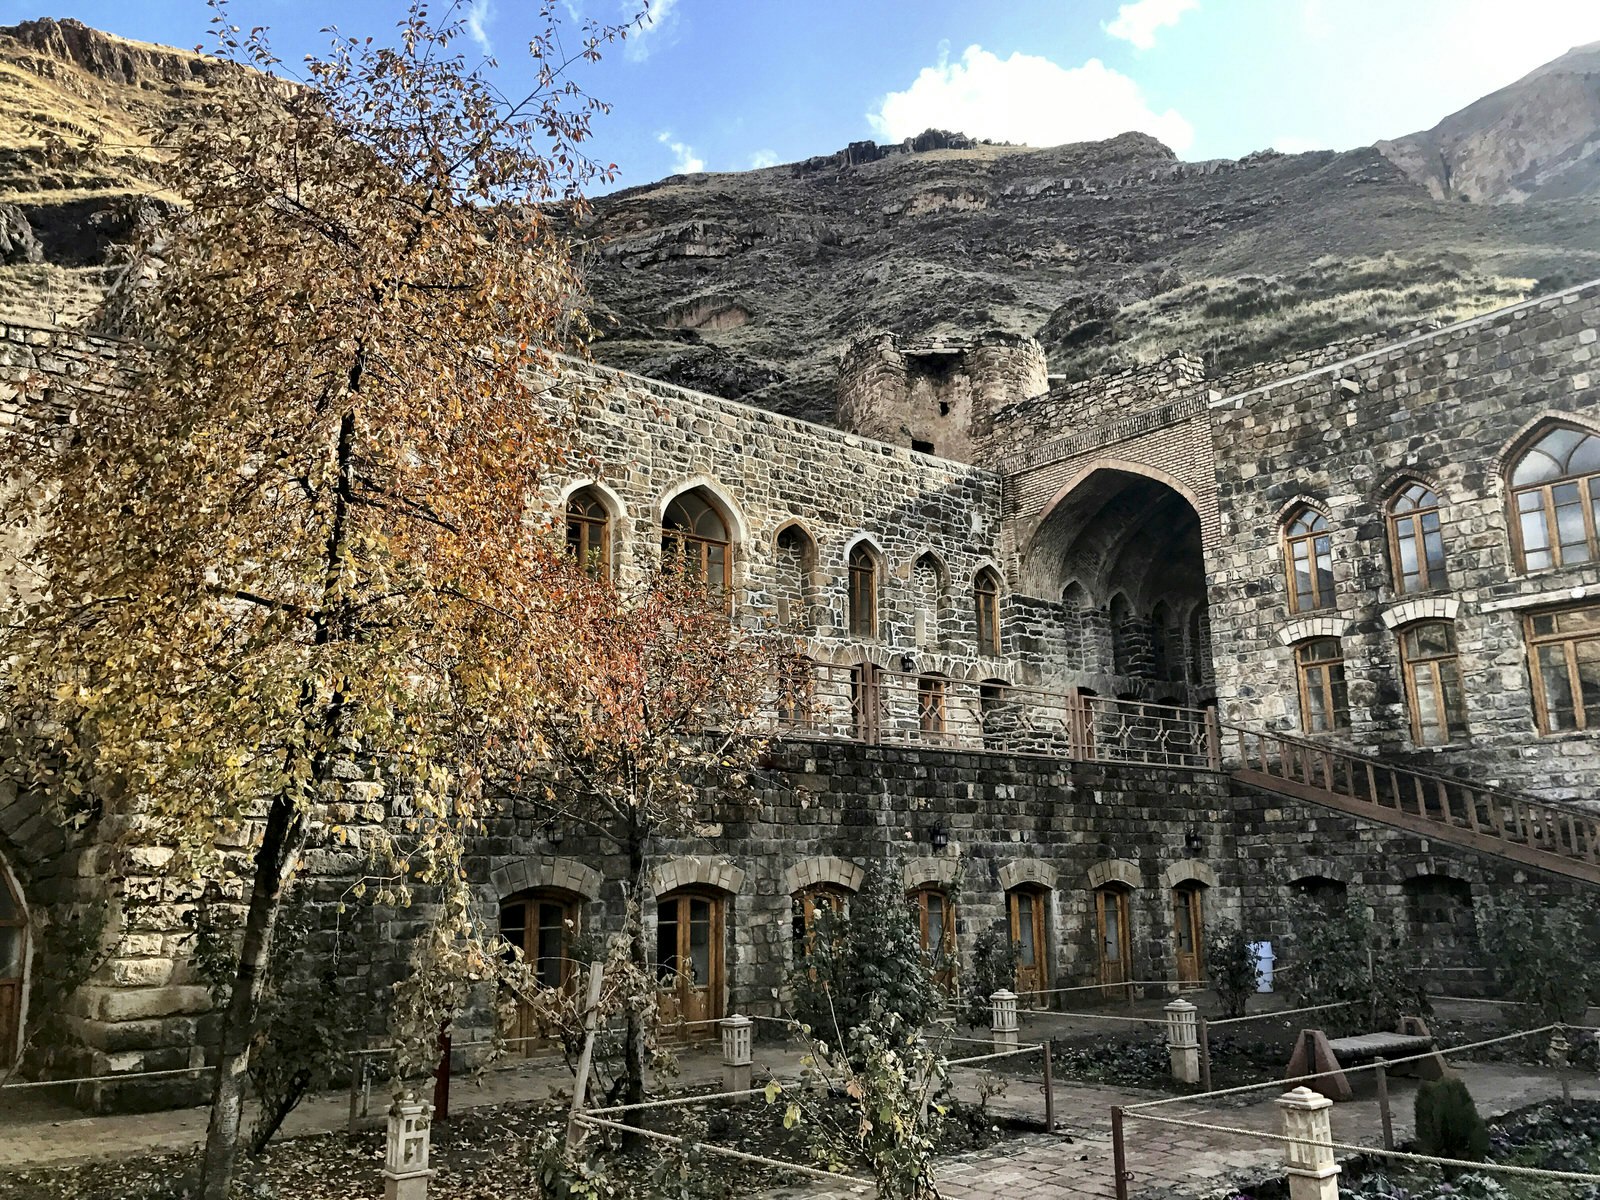 Church of St Stephanos in western Iran. Image by Steve Waters / Lonely Planet